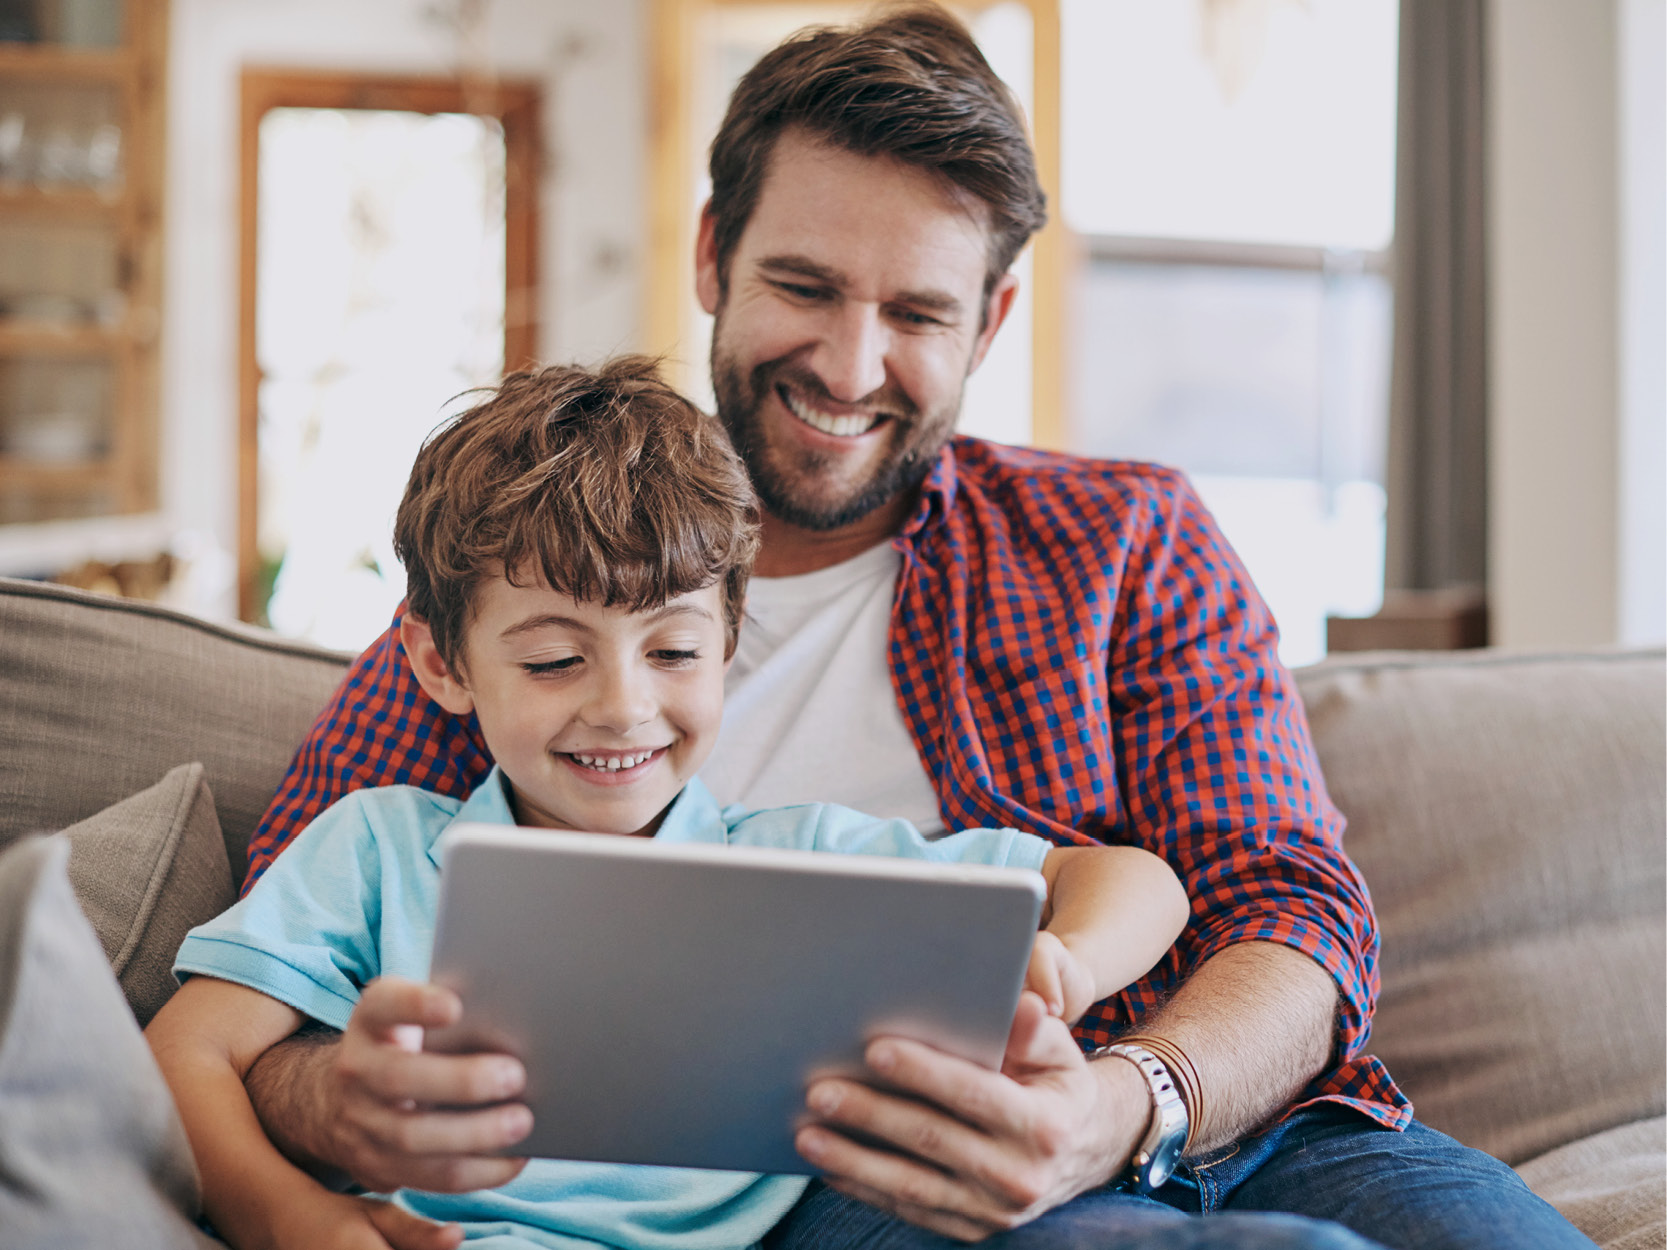 A father and son using fiber internet to surf the web on a tablet.